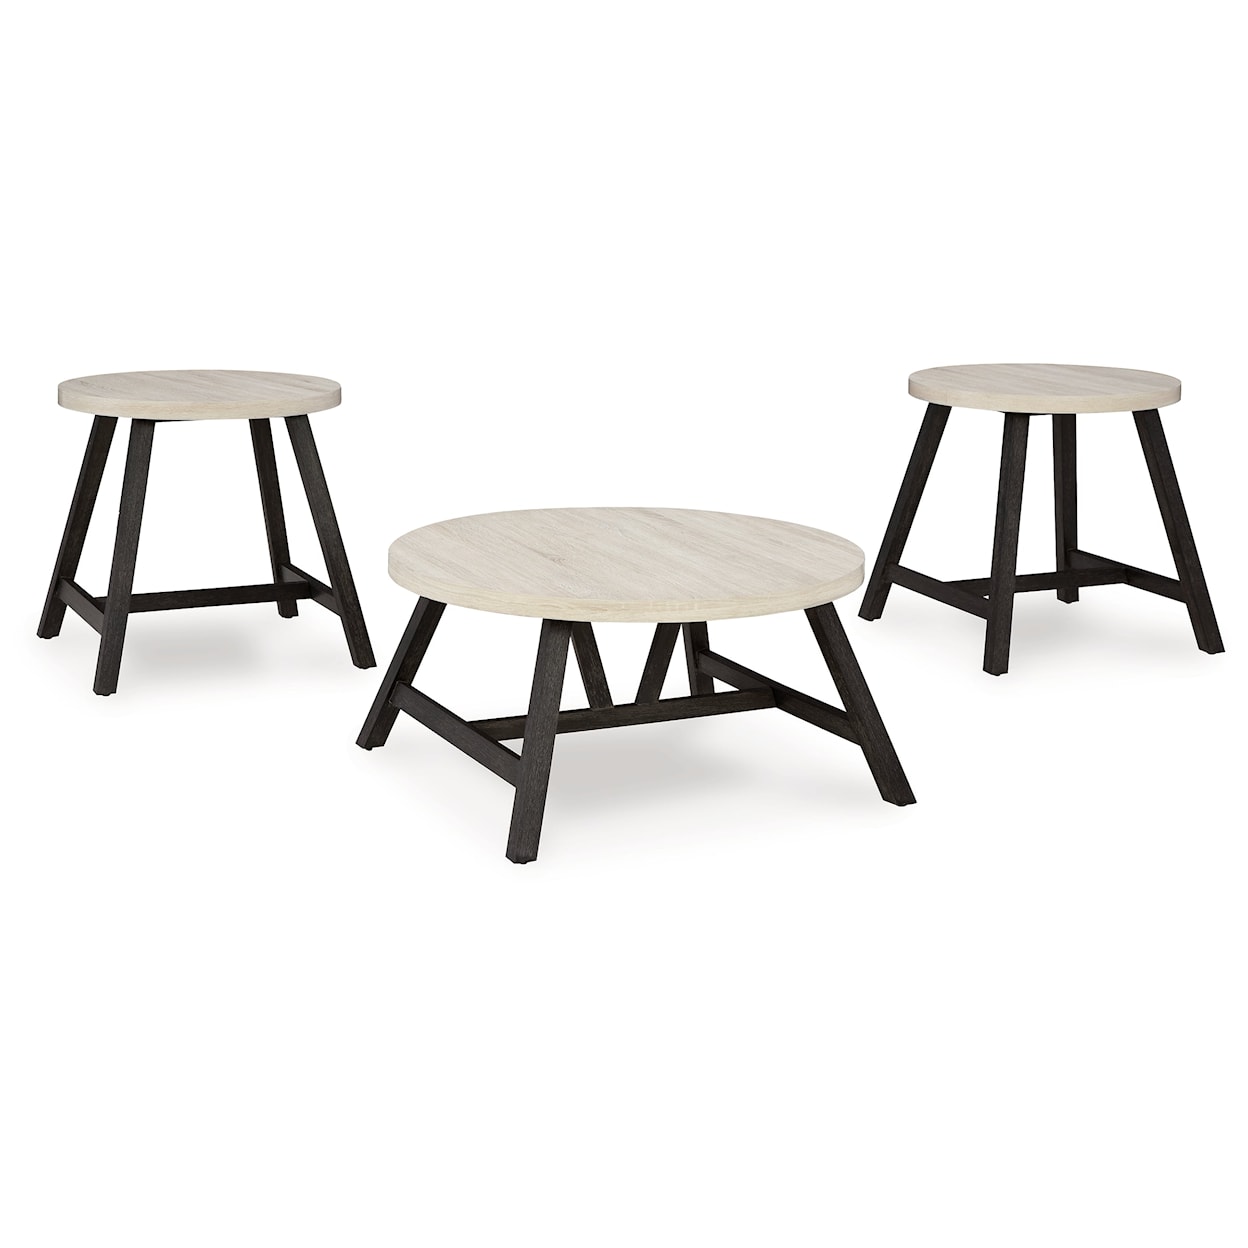 Signature Design by Ashley Furniture Fladona Occasional Table (Set of 3)